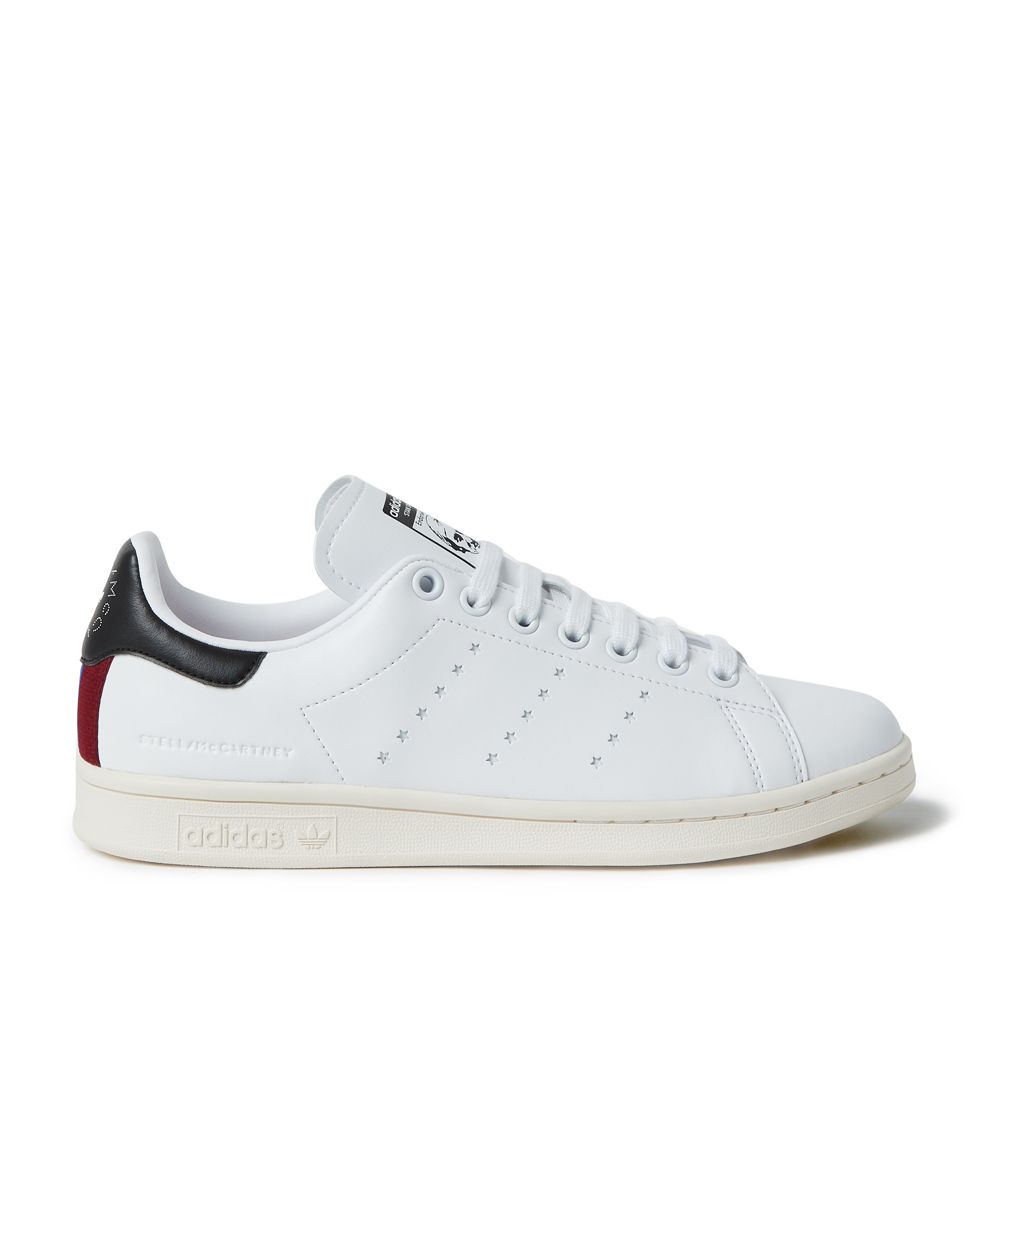 Stella McCartney Made Vegetarian Stan Smith Sneakers | Who What Wear